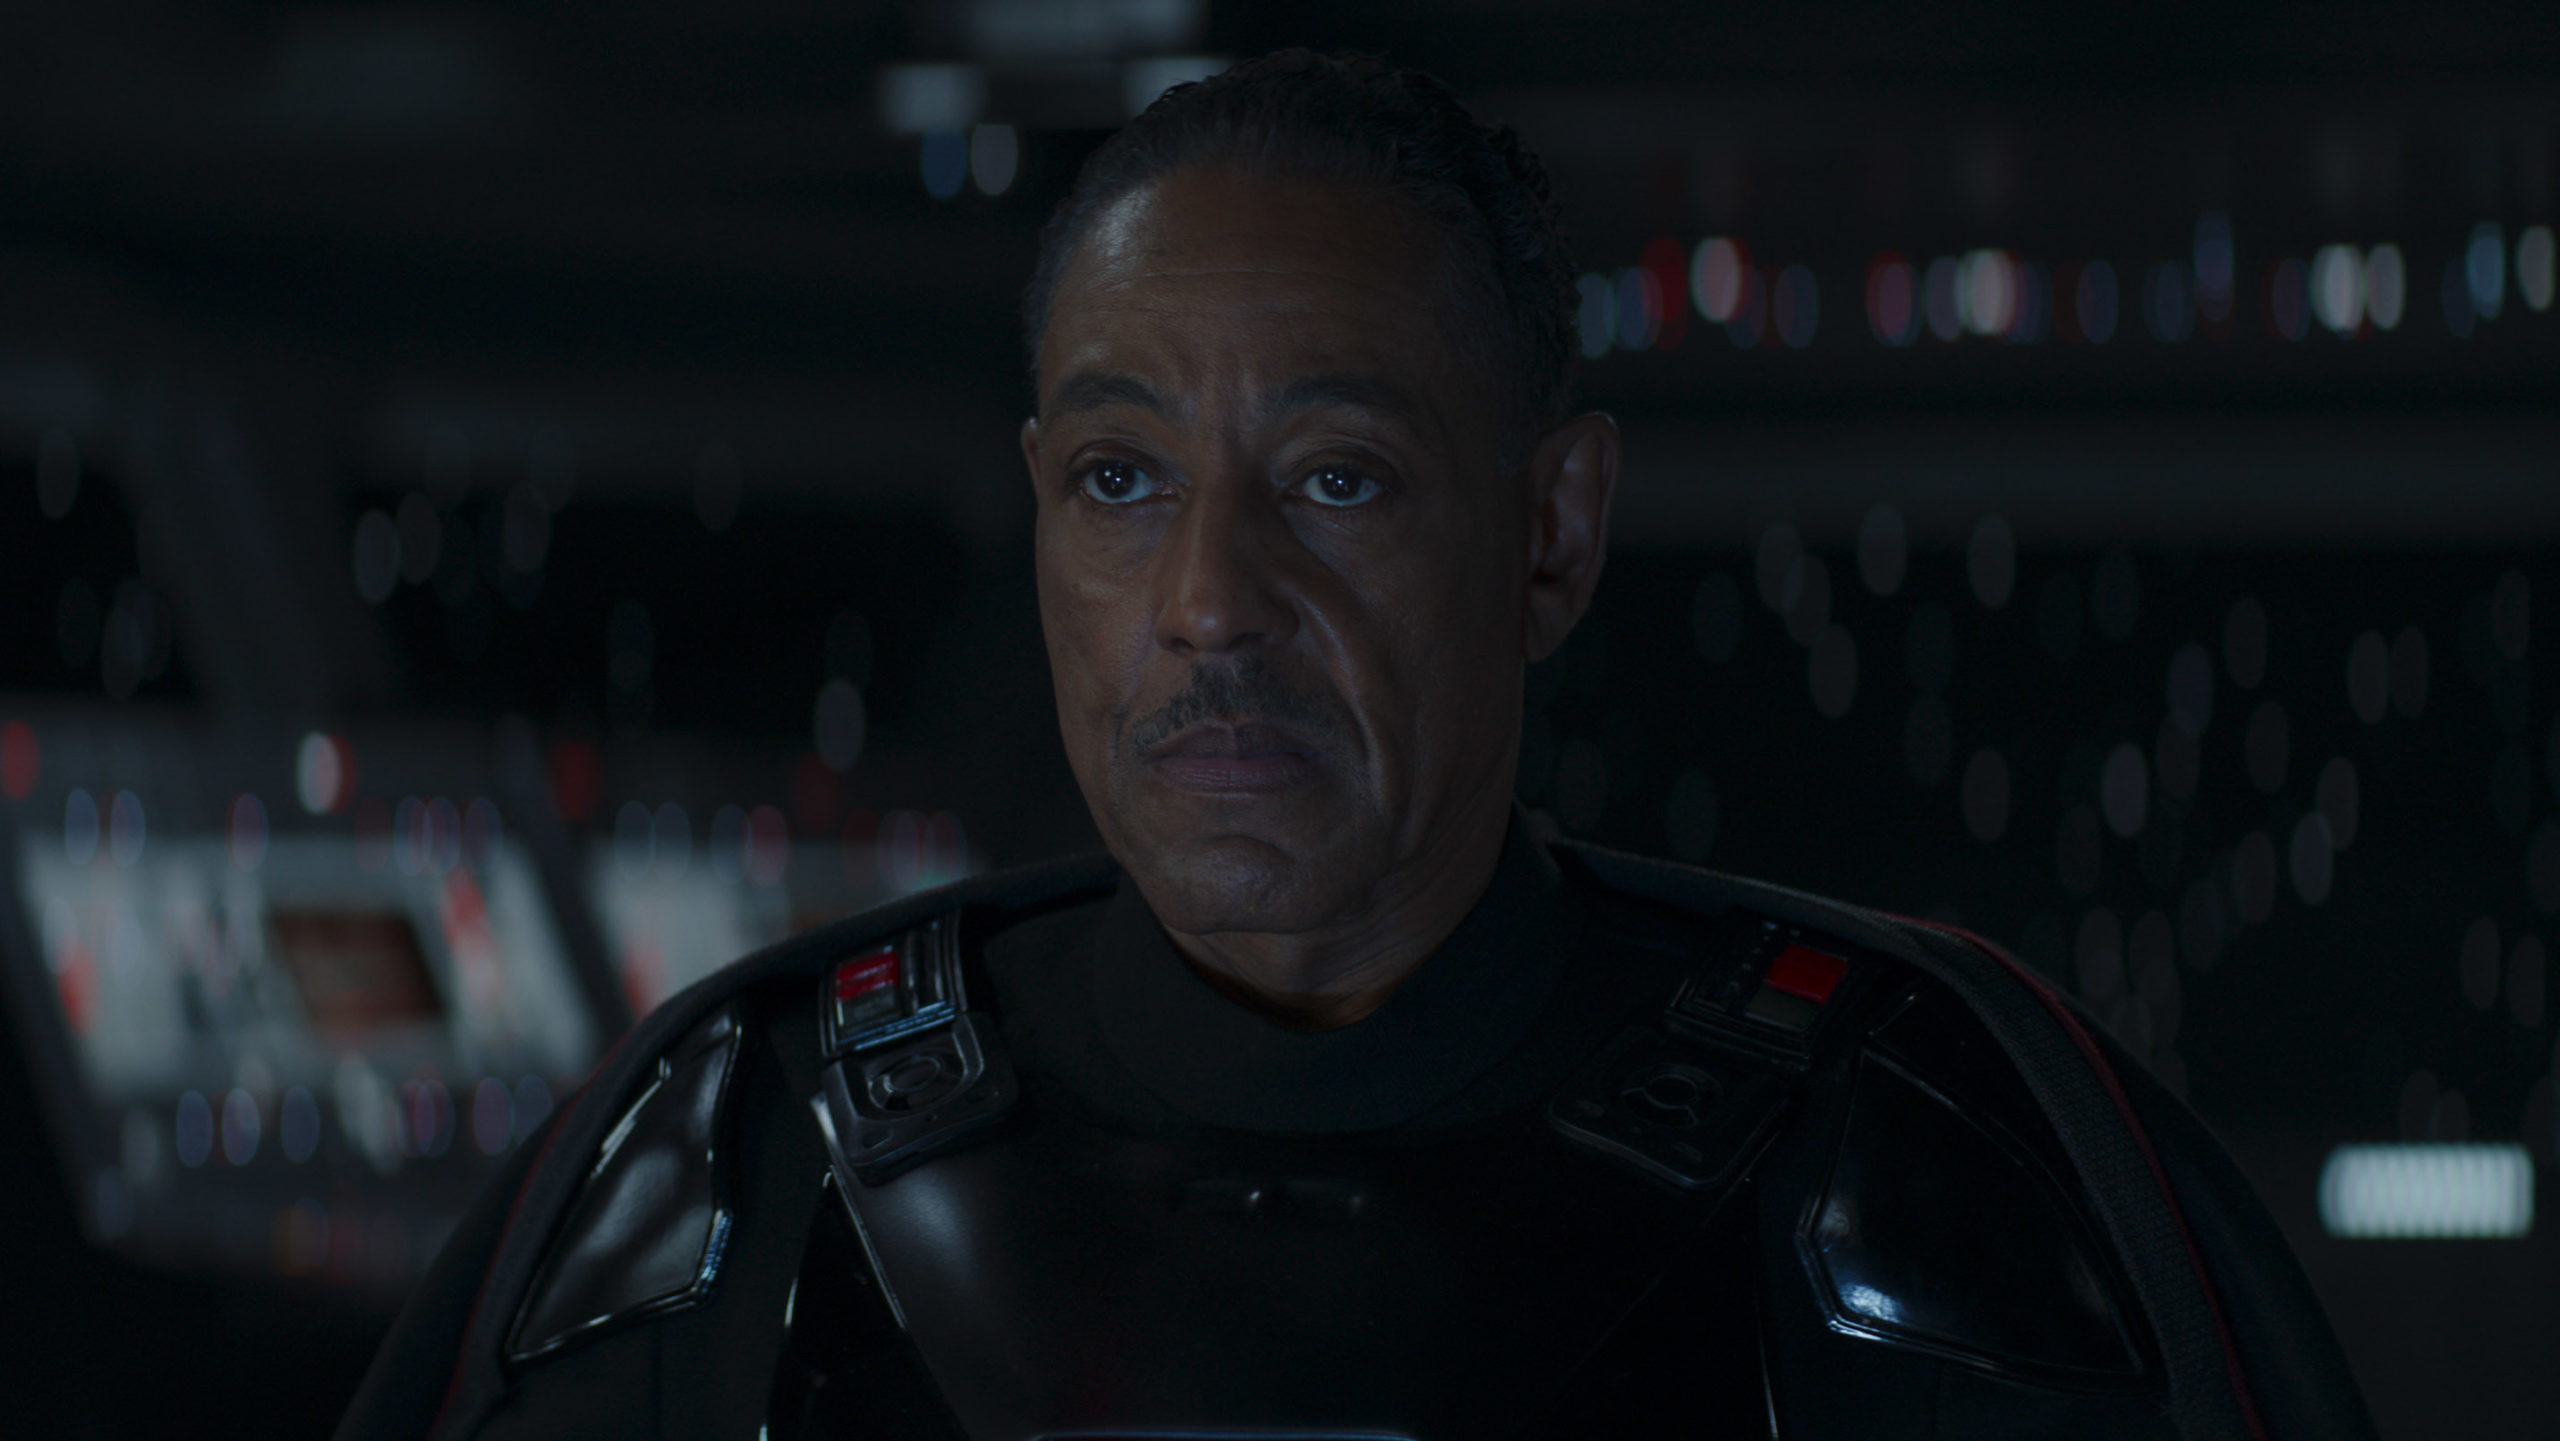 Moff Gideon was not too pleased with the message at the end of the episode. (Photo: Lucasfilm)